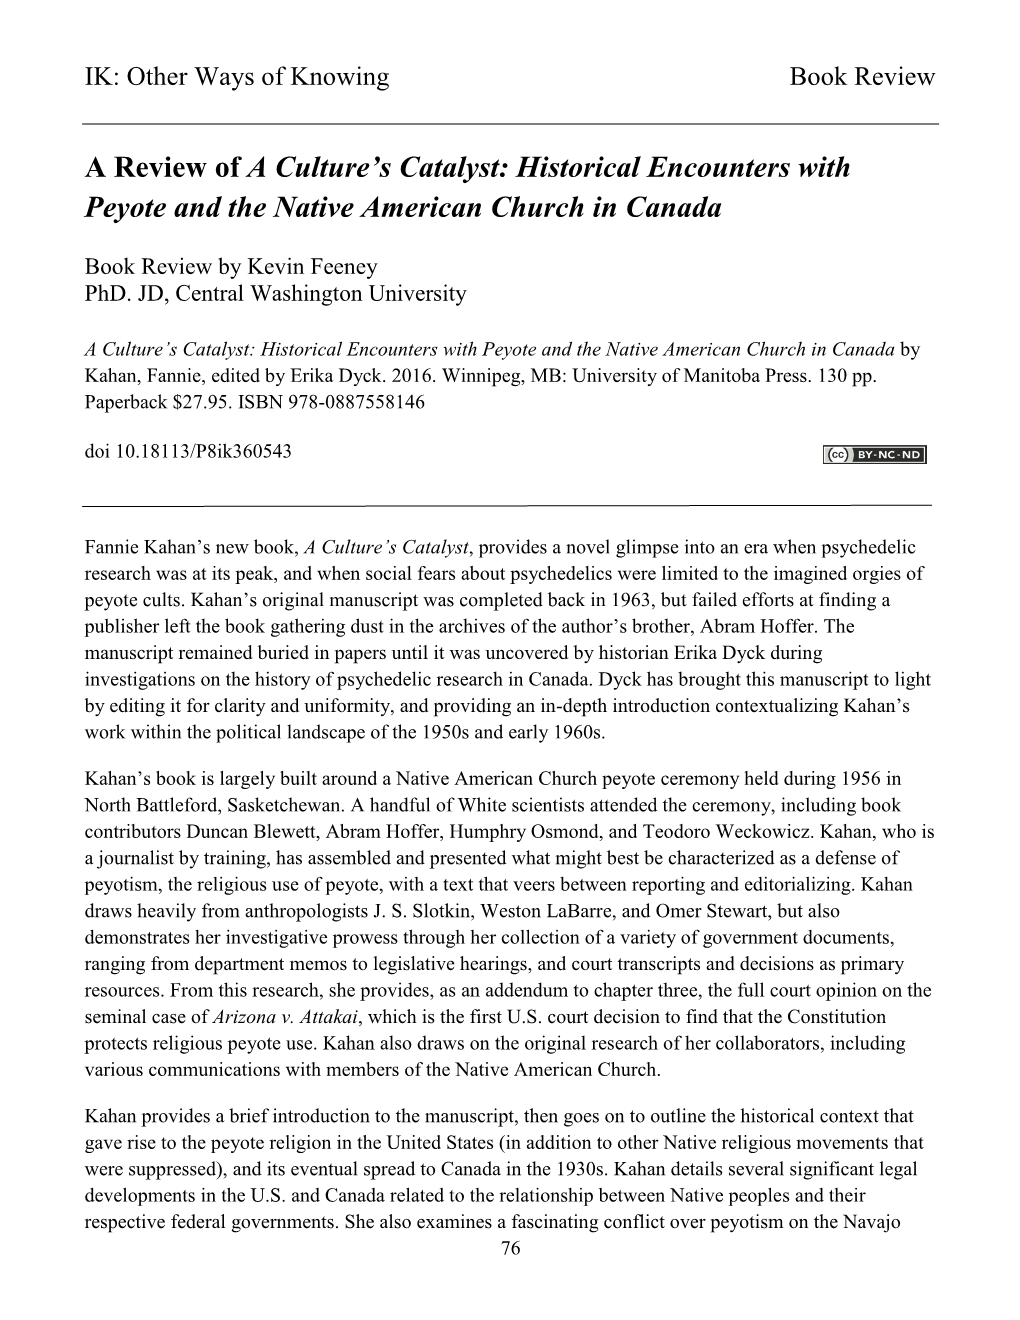 A Review of a Culture's Catalyst: Historical Encounters with Peyote and the Native American Church in Canada